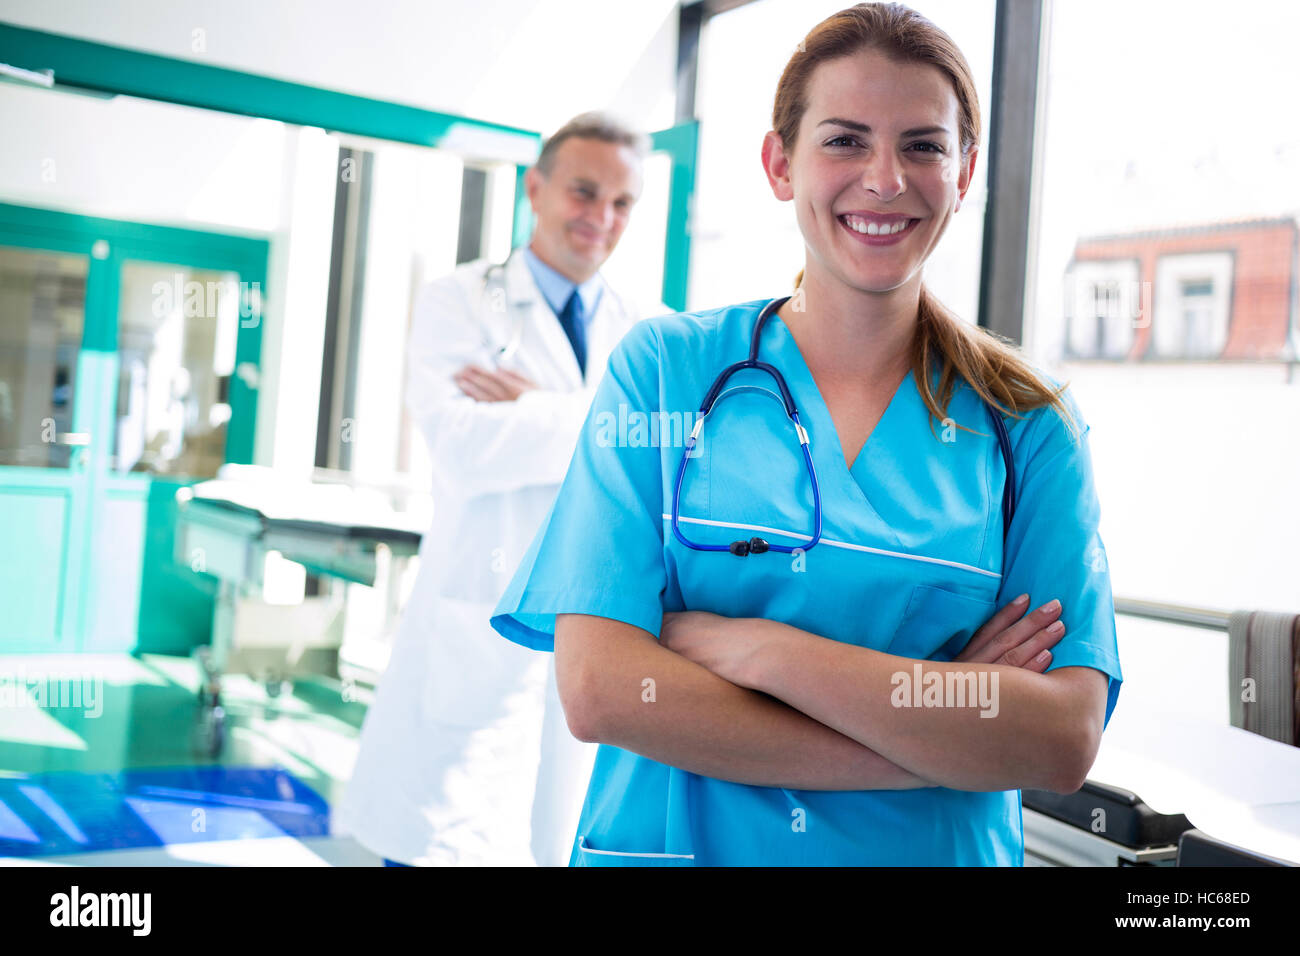 Portrait of doctor and nurse standing with arms crossed Stock Photo